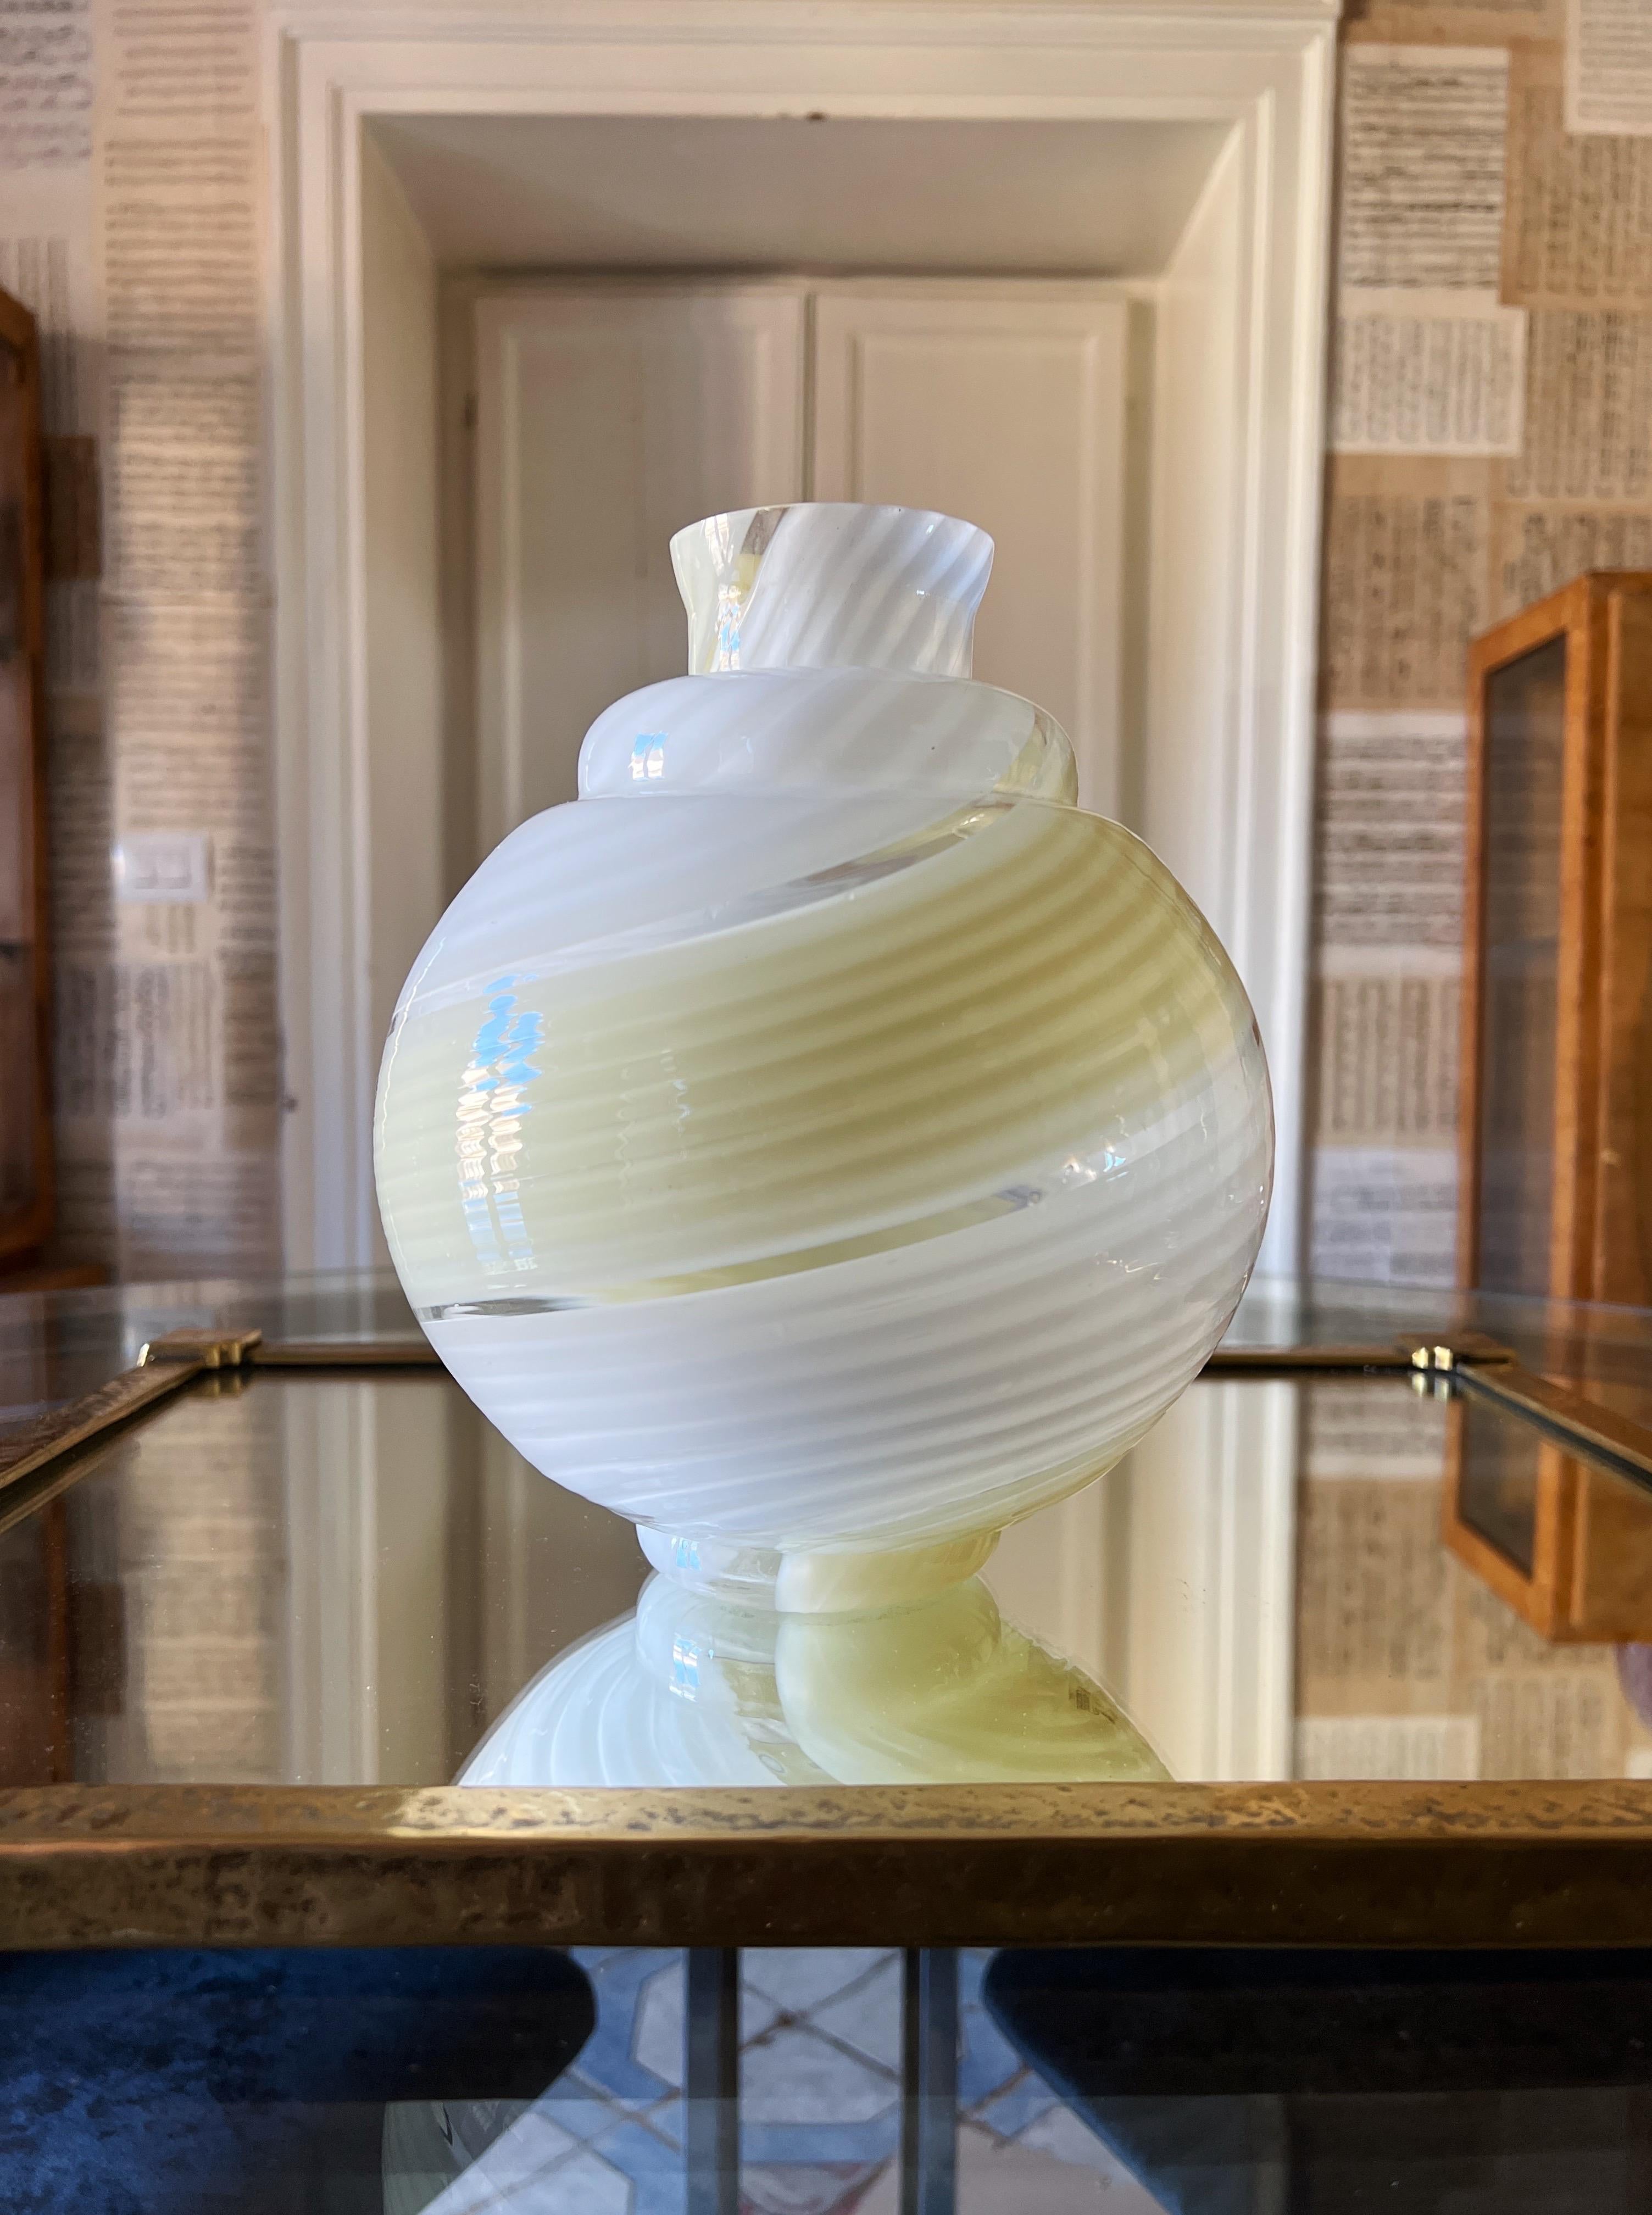 Mid century modern Murano glass vase. Its unique in its kind with its bubble shape design and striped glass.